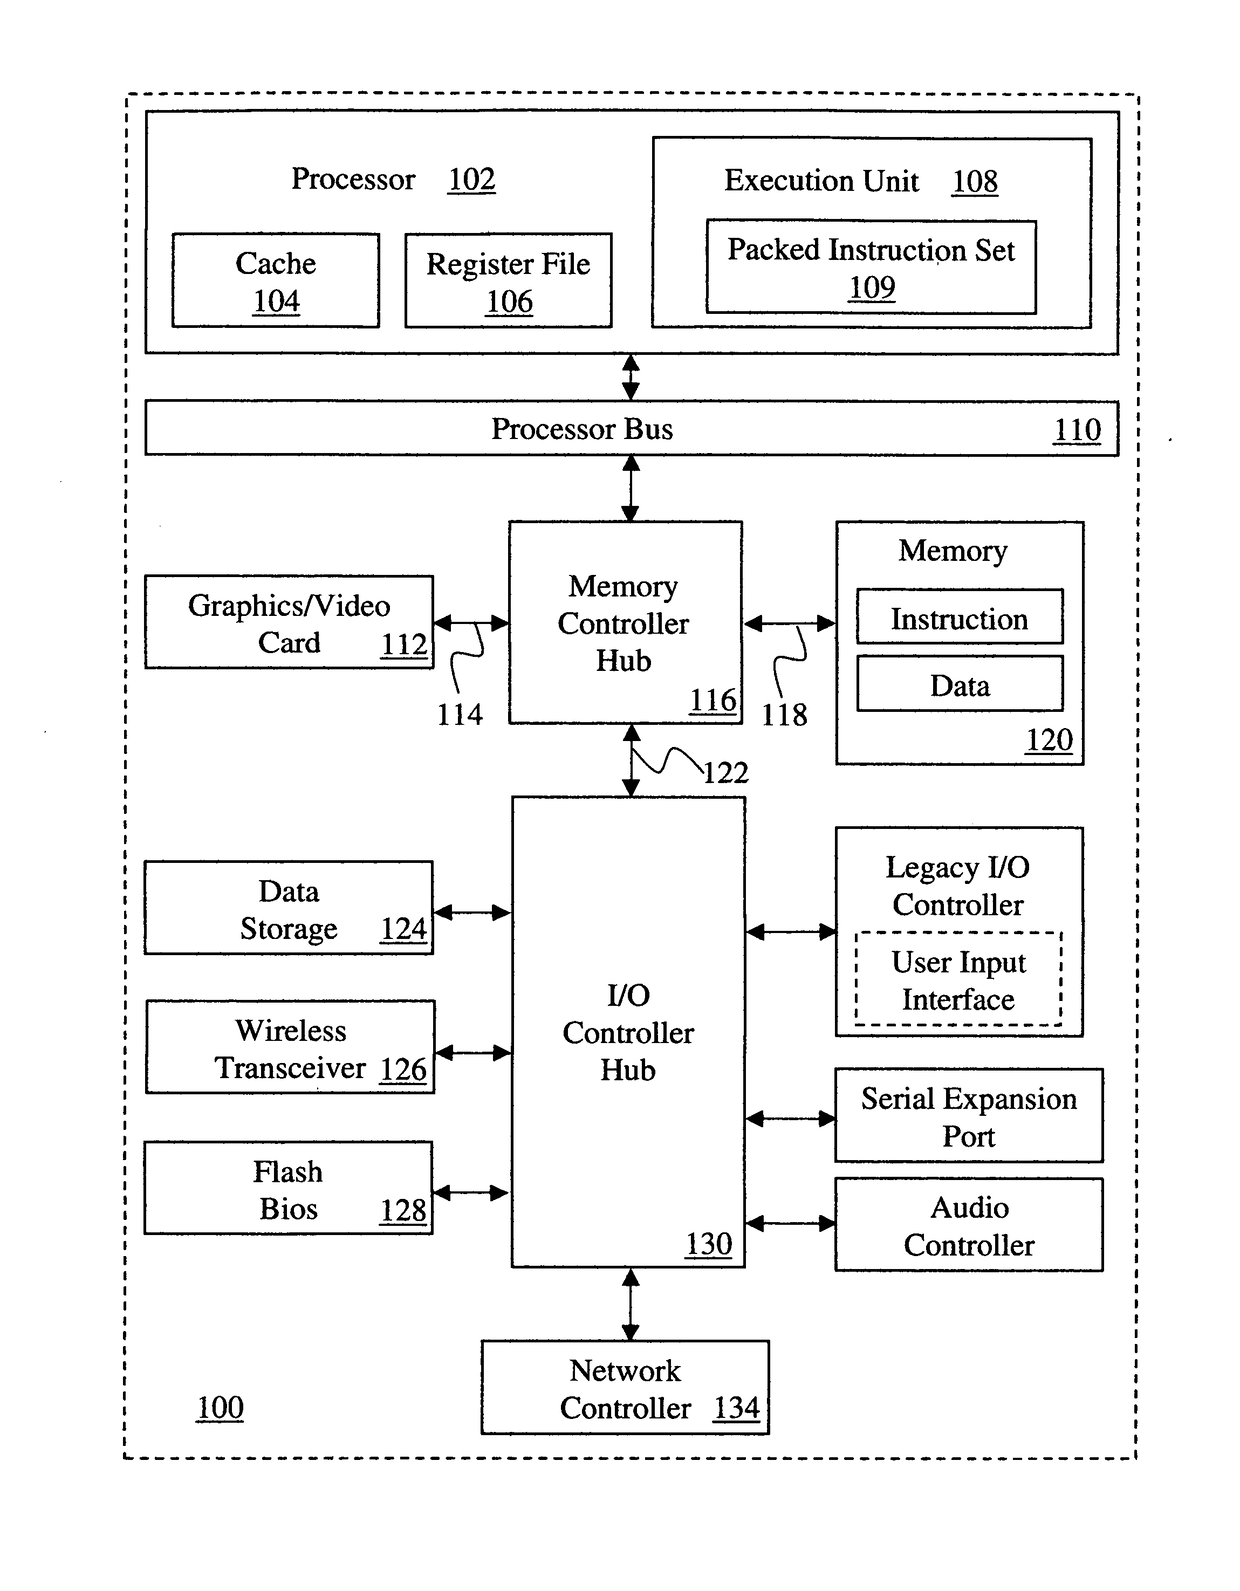 Method and apparatus for user-level thread synchronization with a monitor and MWAIT architecture